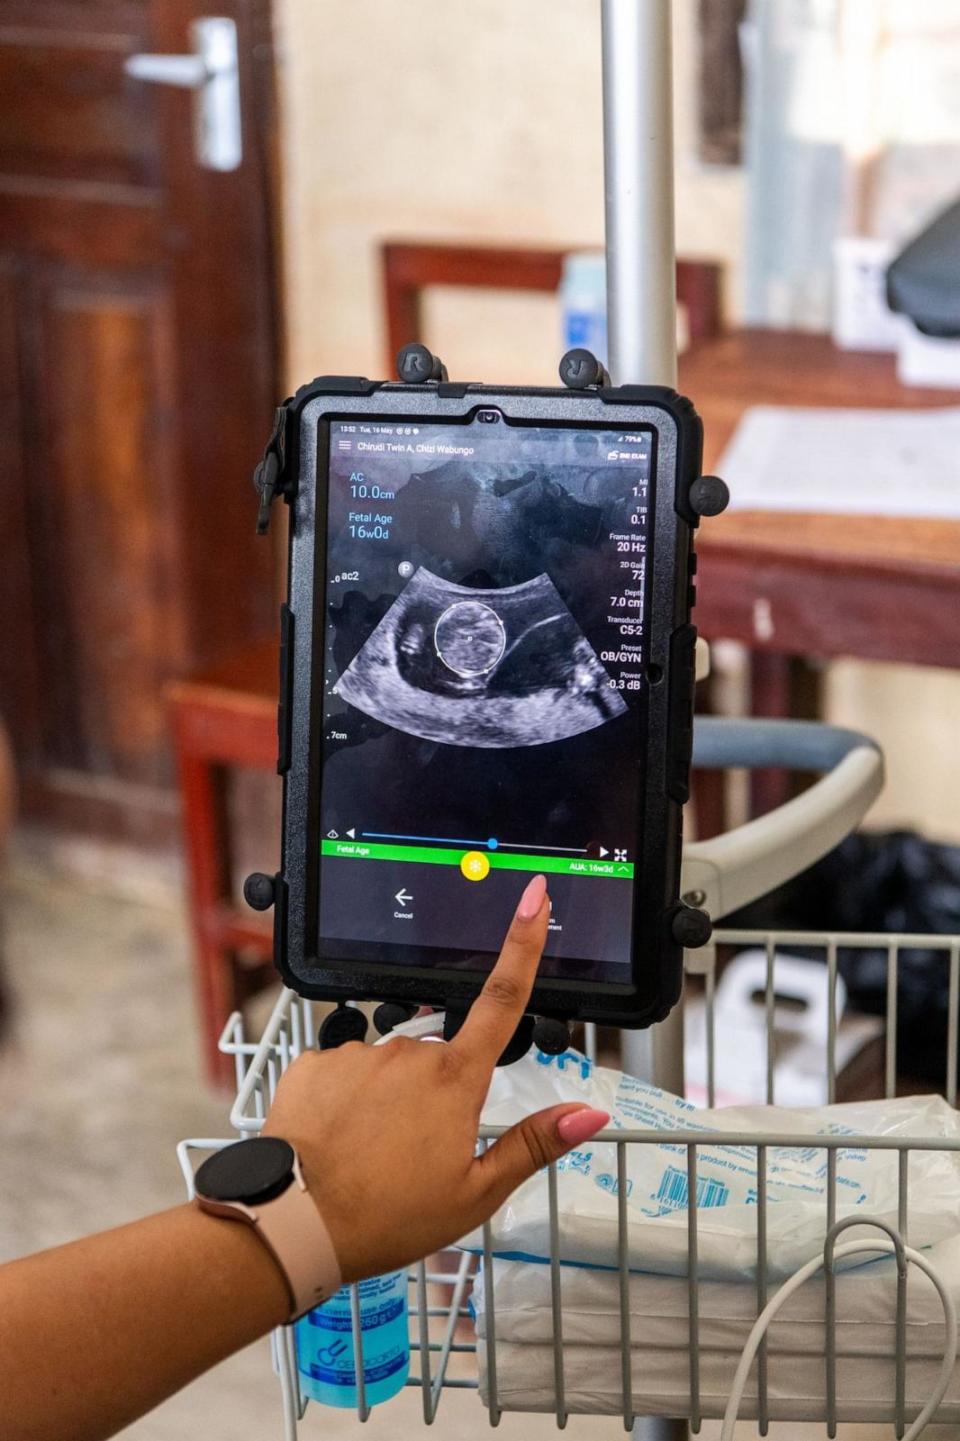 PHOTO: The Bill & Melinda Gates Foundation is working to increase access globally to AI-enabled ultrasound devices. (The Bill & Melinda Gates Foundation)